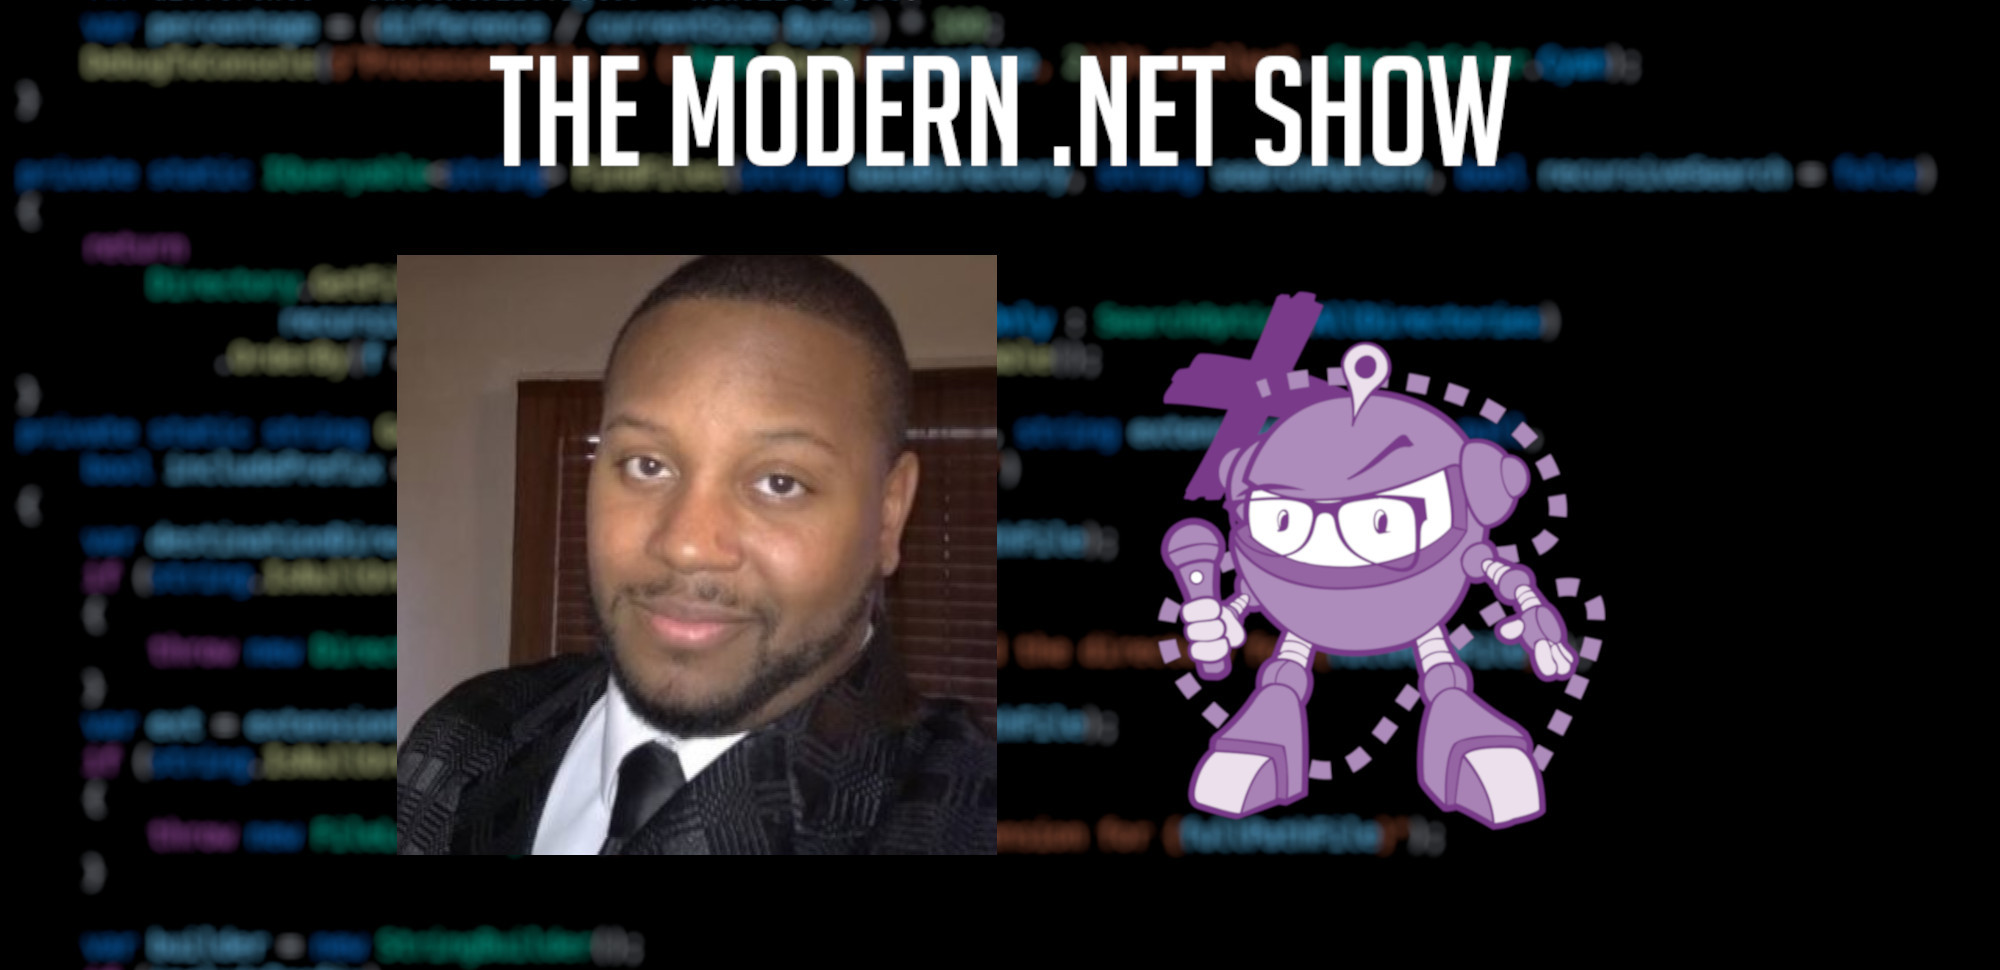 A blurry image of source code, too blurry to read, take the place of the background. Layered over that are the headshot of Jeremy Sinclair and a purple robot holding a microphone; these are on either side of the centre of the image. Above both is the heading 'THE MODERN .NET SHOW' in bold, white text.